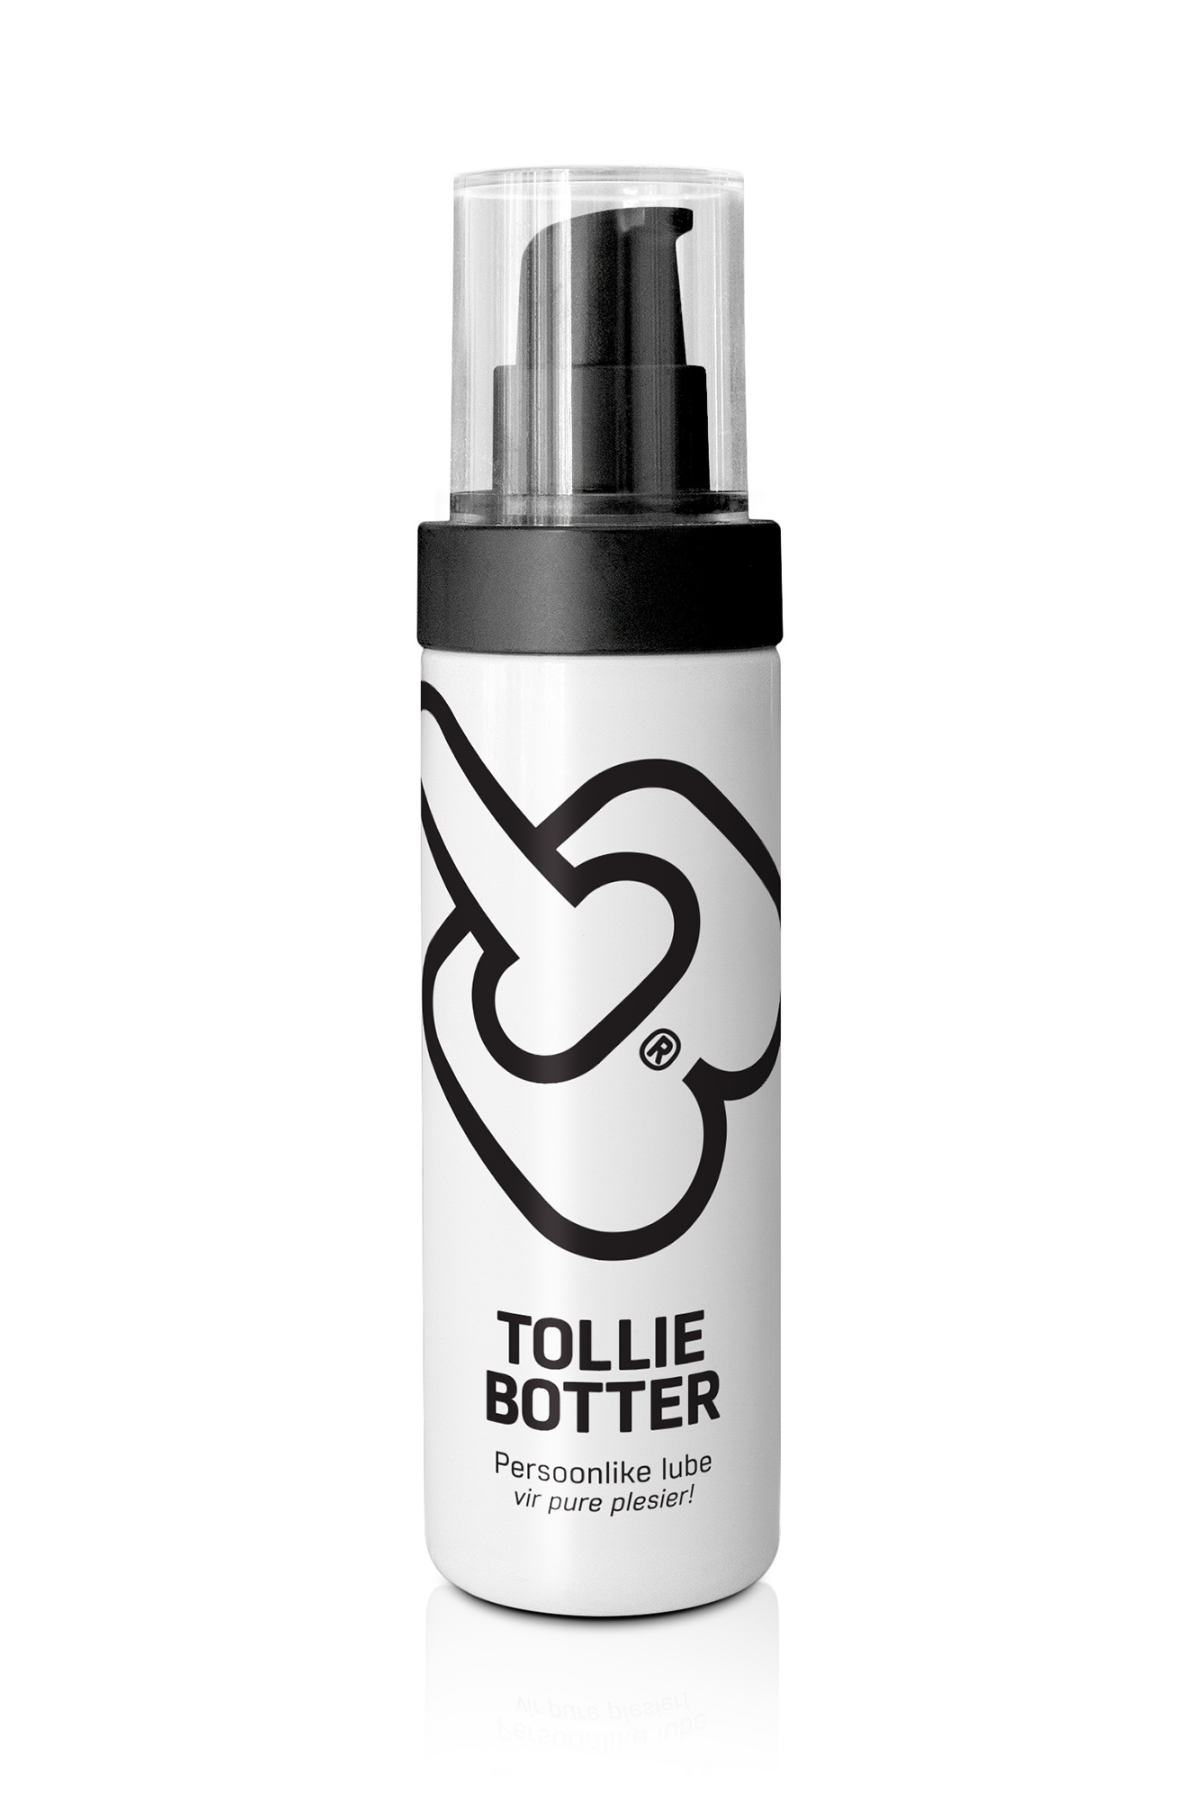 Tolliebotter Personal Lube | 100ml